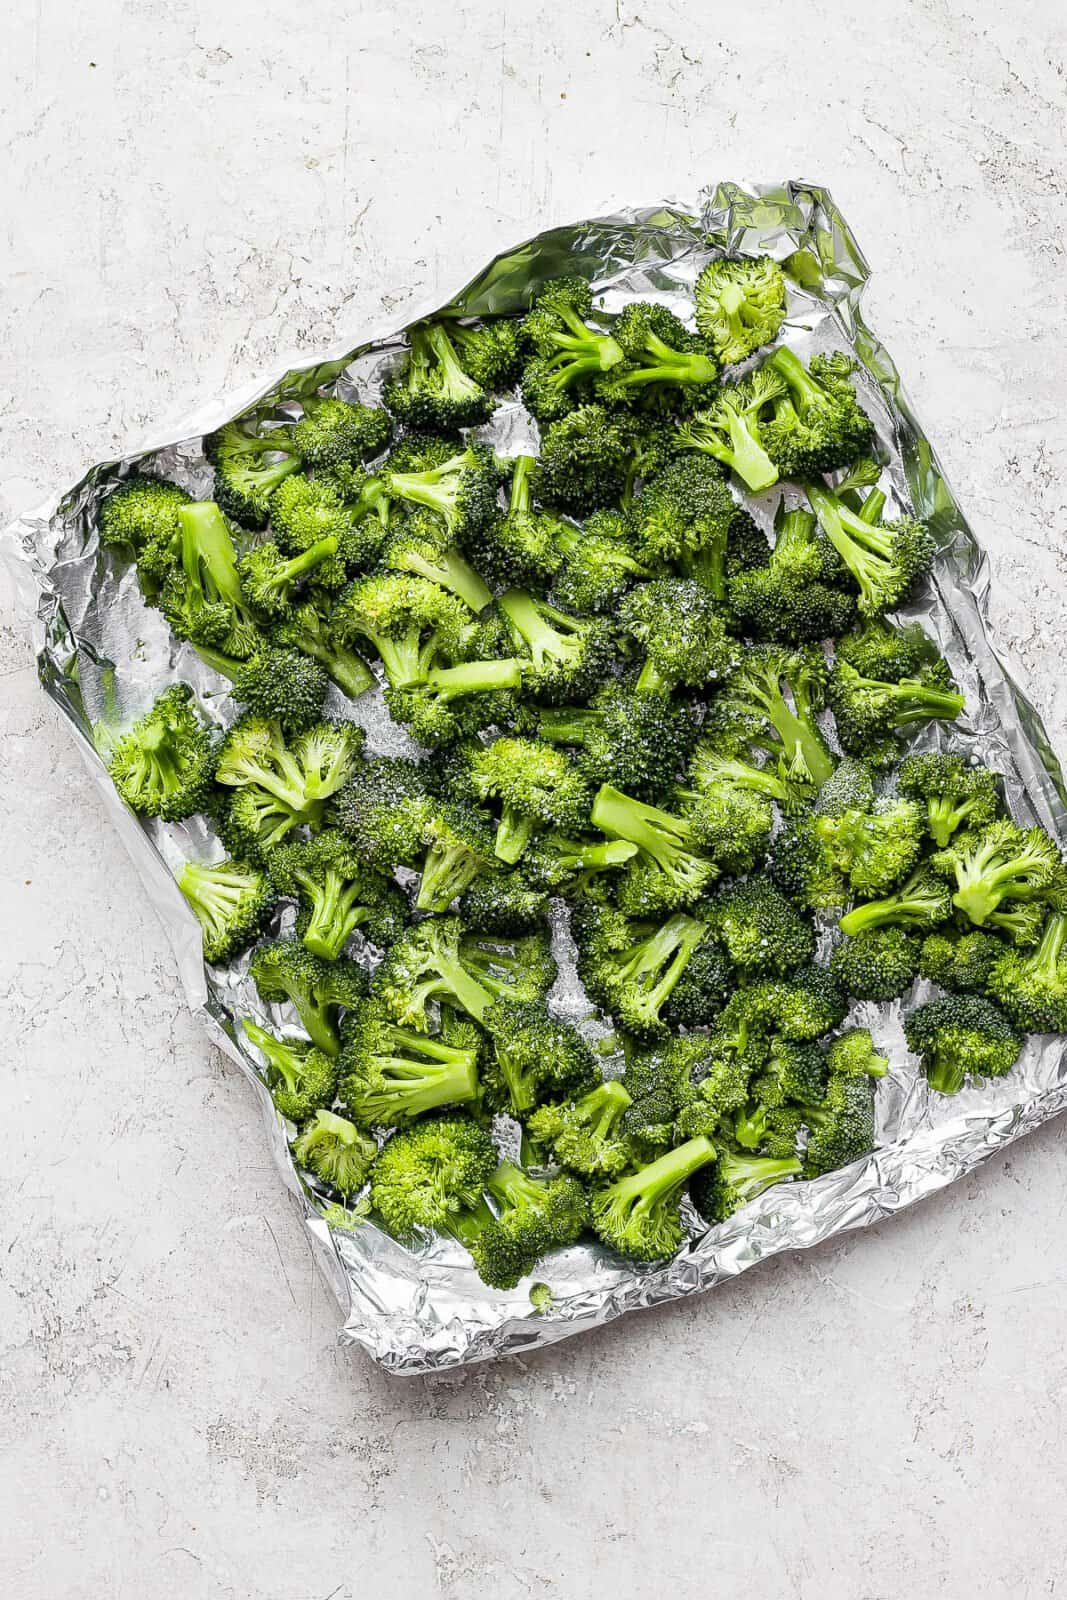 Broccoli florets in an aluminum foil boat after being coated in olive oil and salt sprinkled on top.